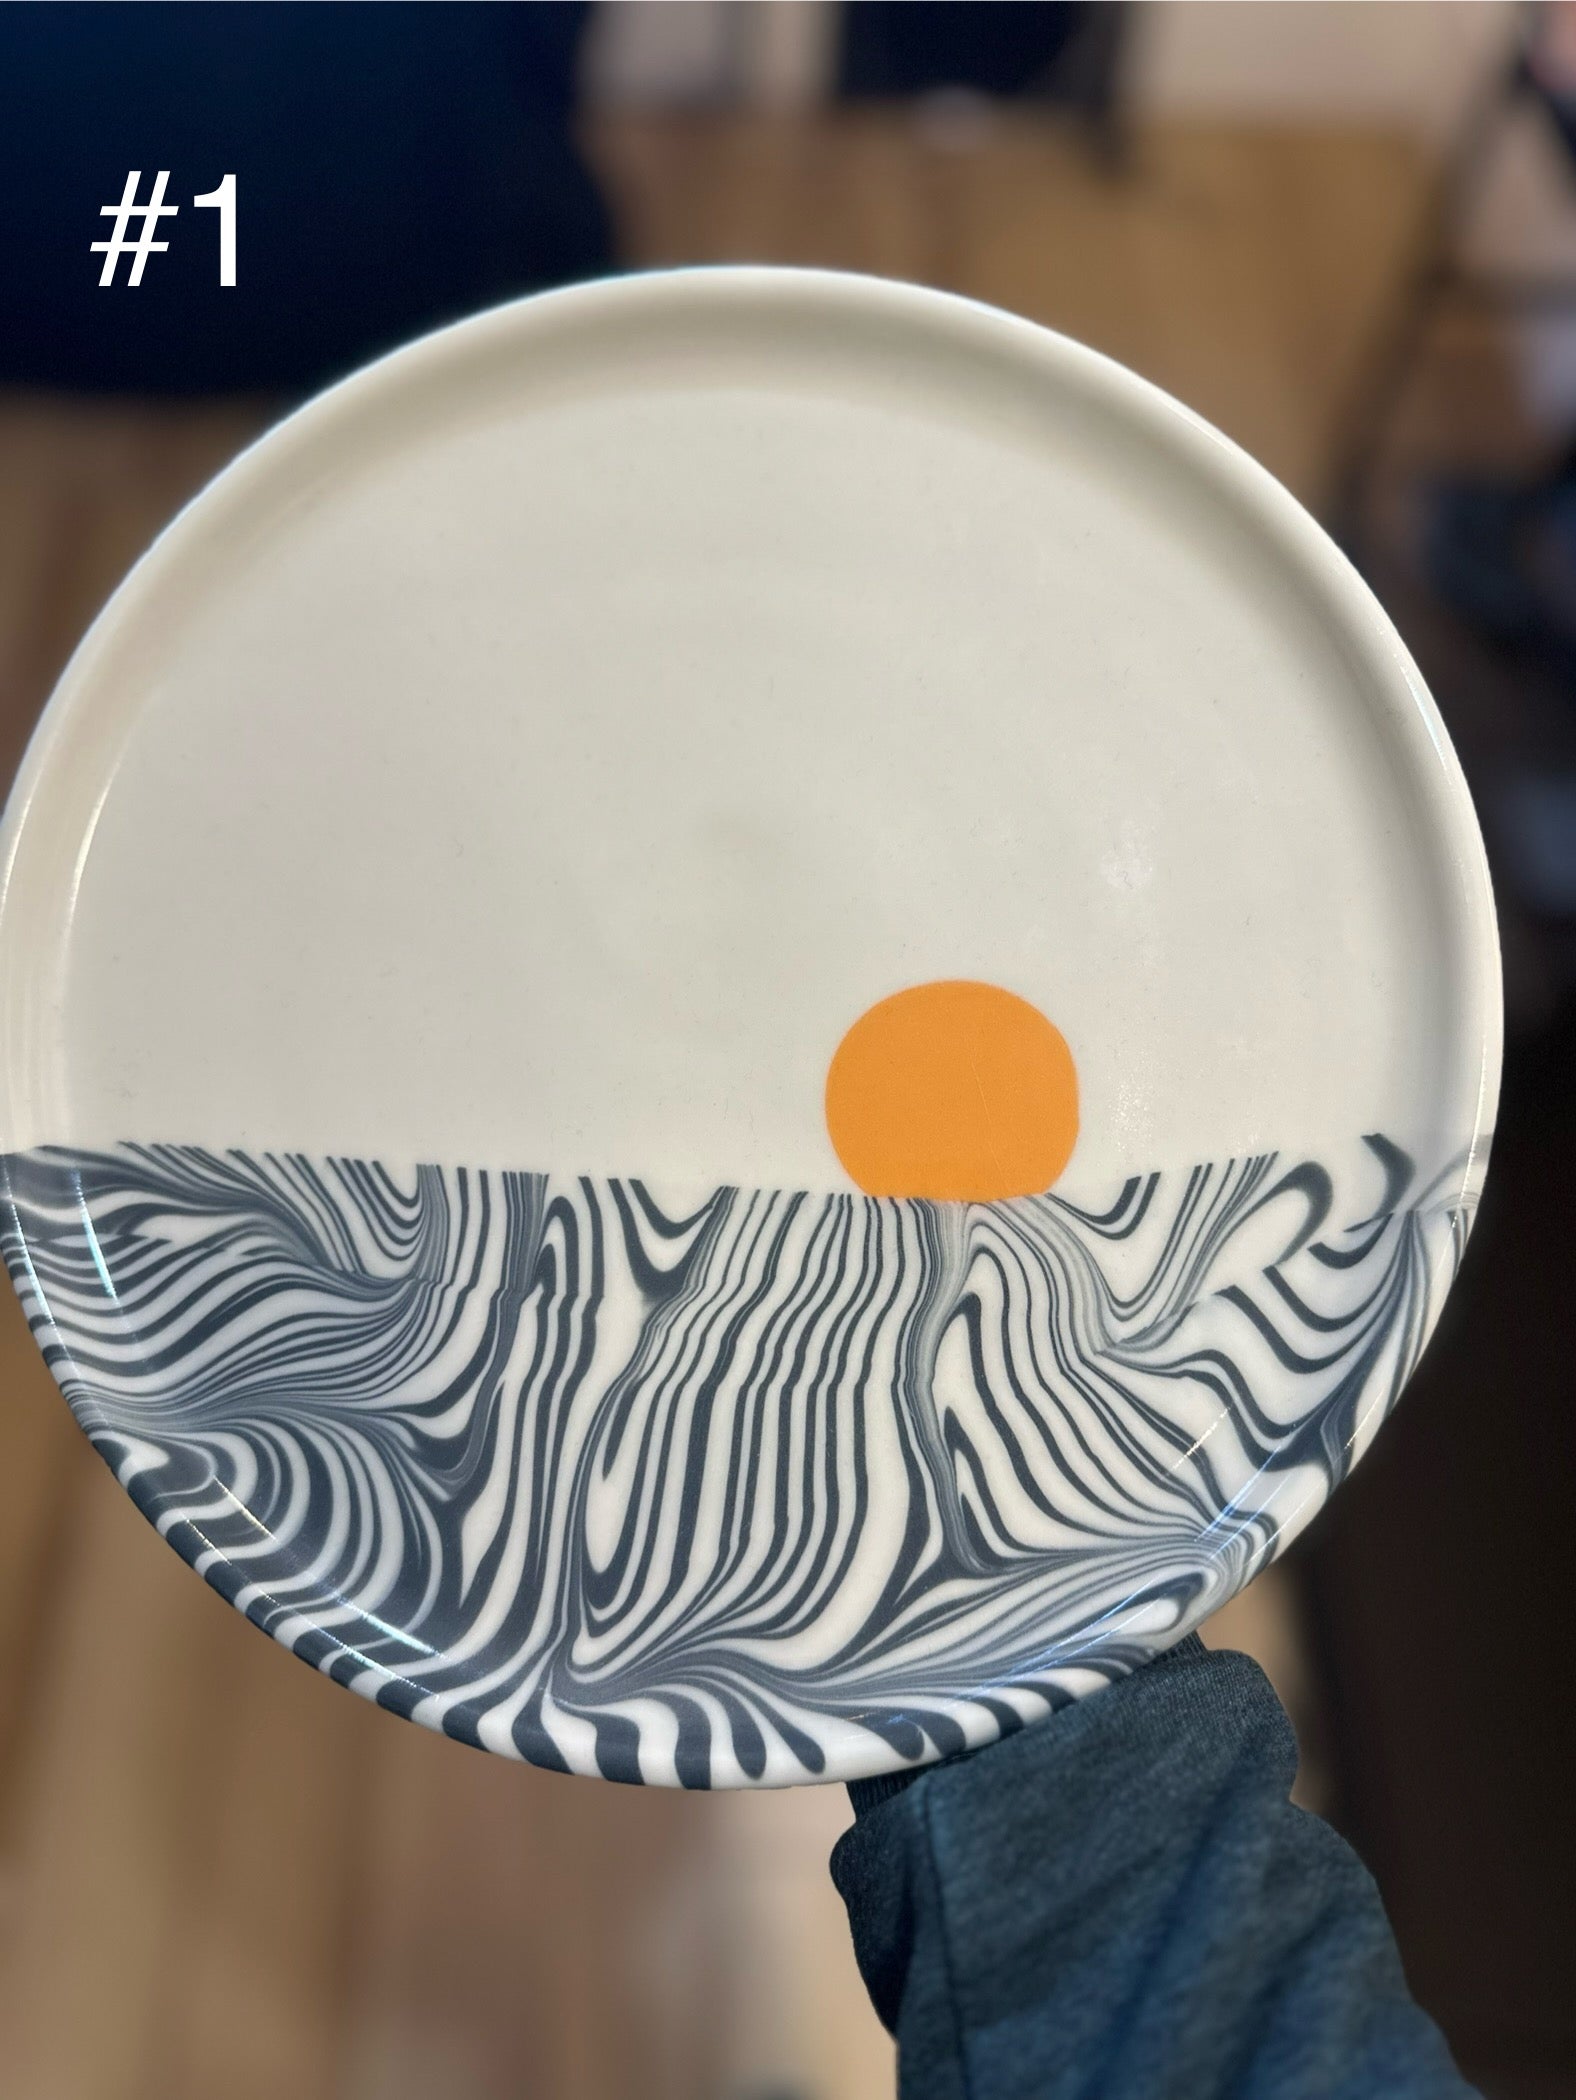 One-off plates